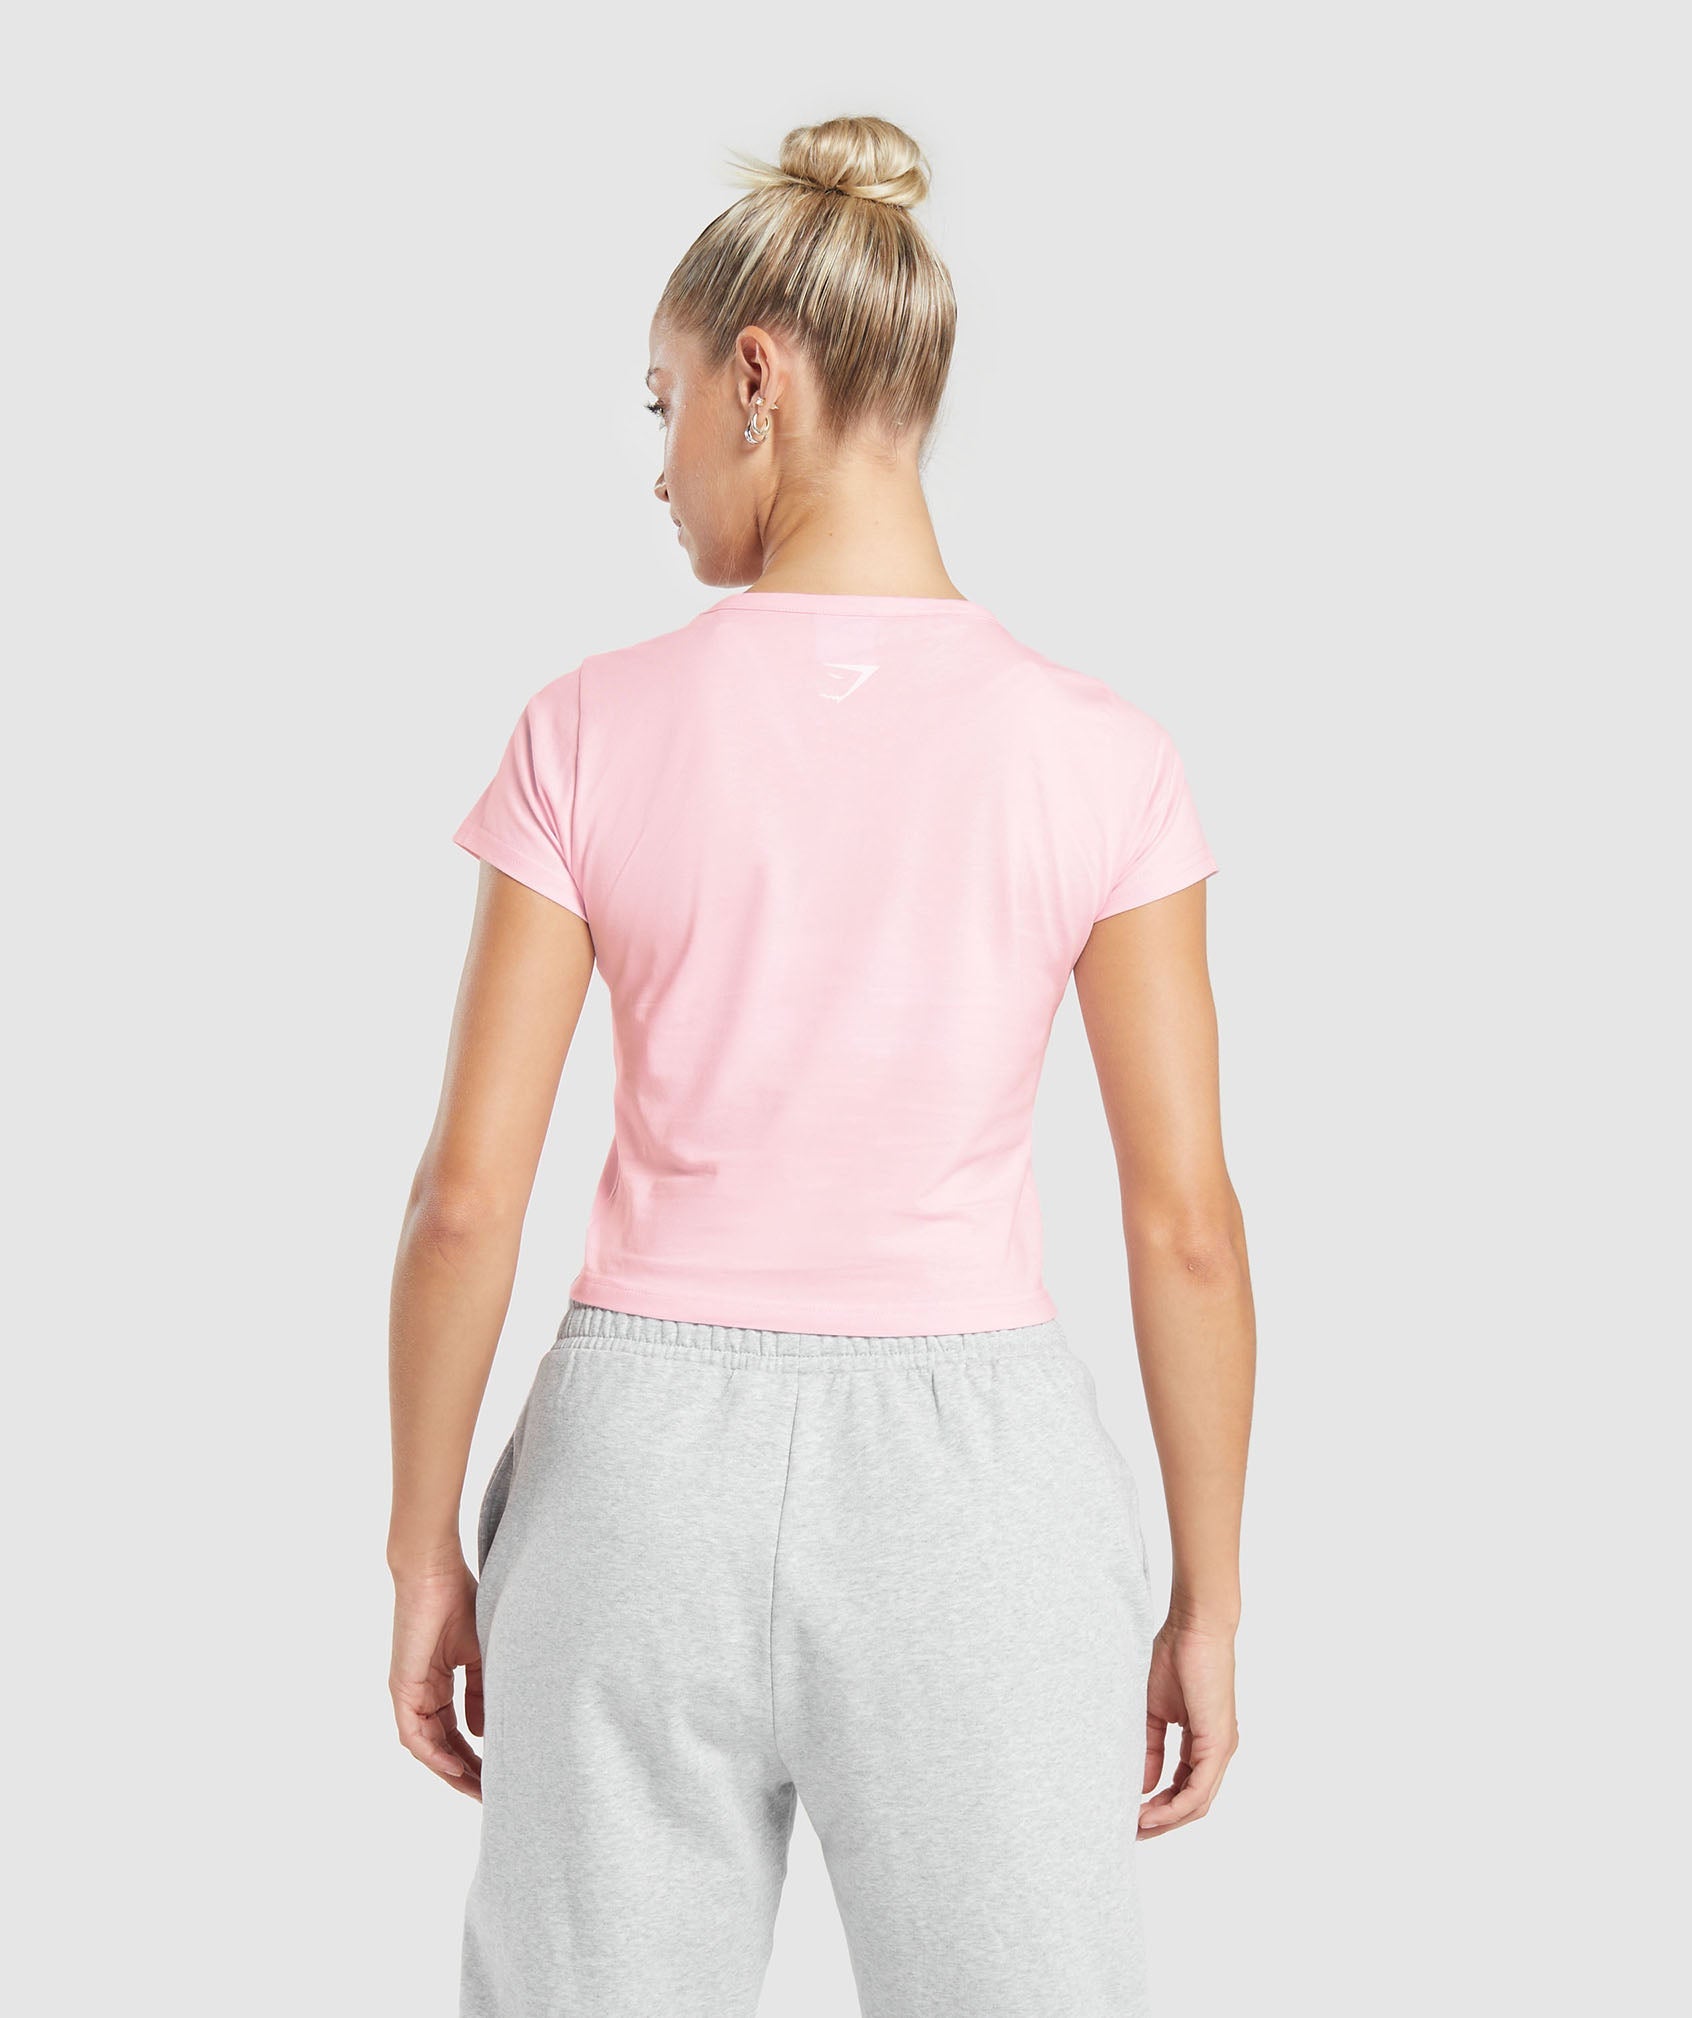 Love Hearts Crop Top in Dolly Pink - view 2